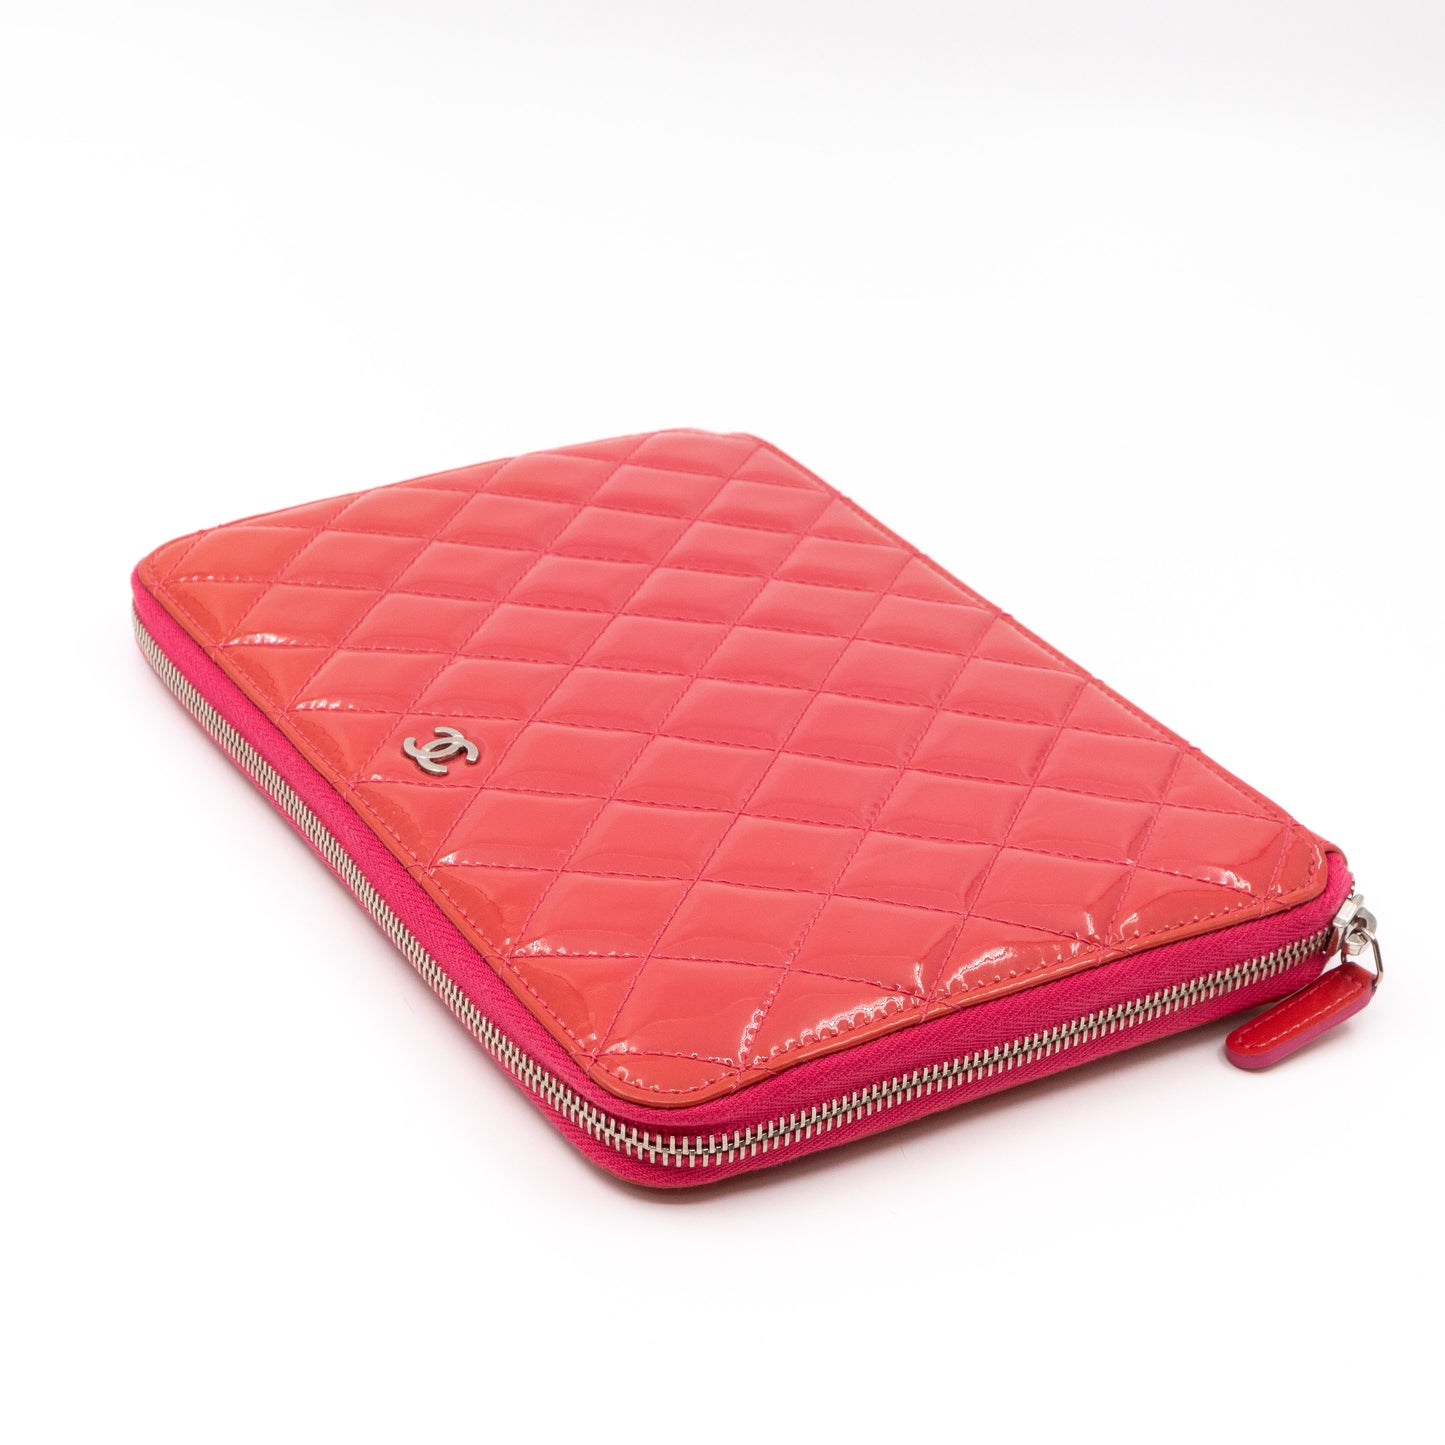 Quilted Zip Organizer Clutch Patent Leather Pink